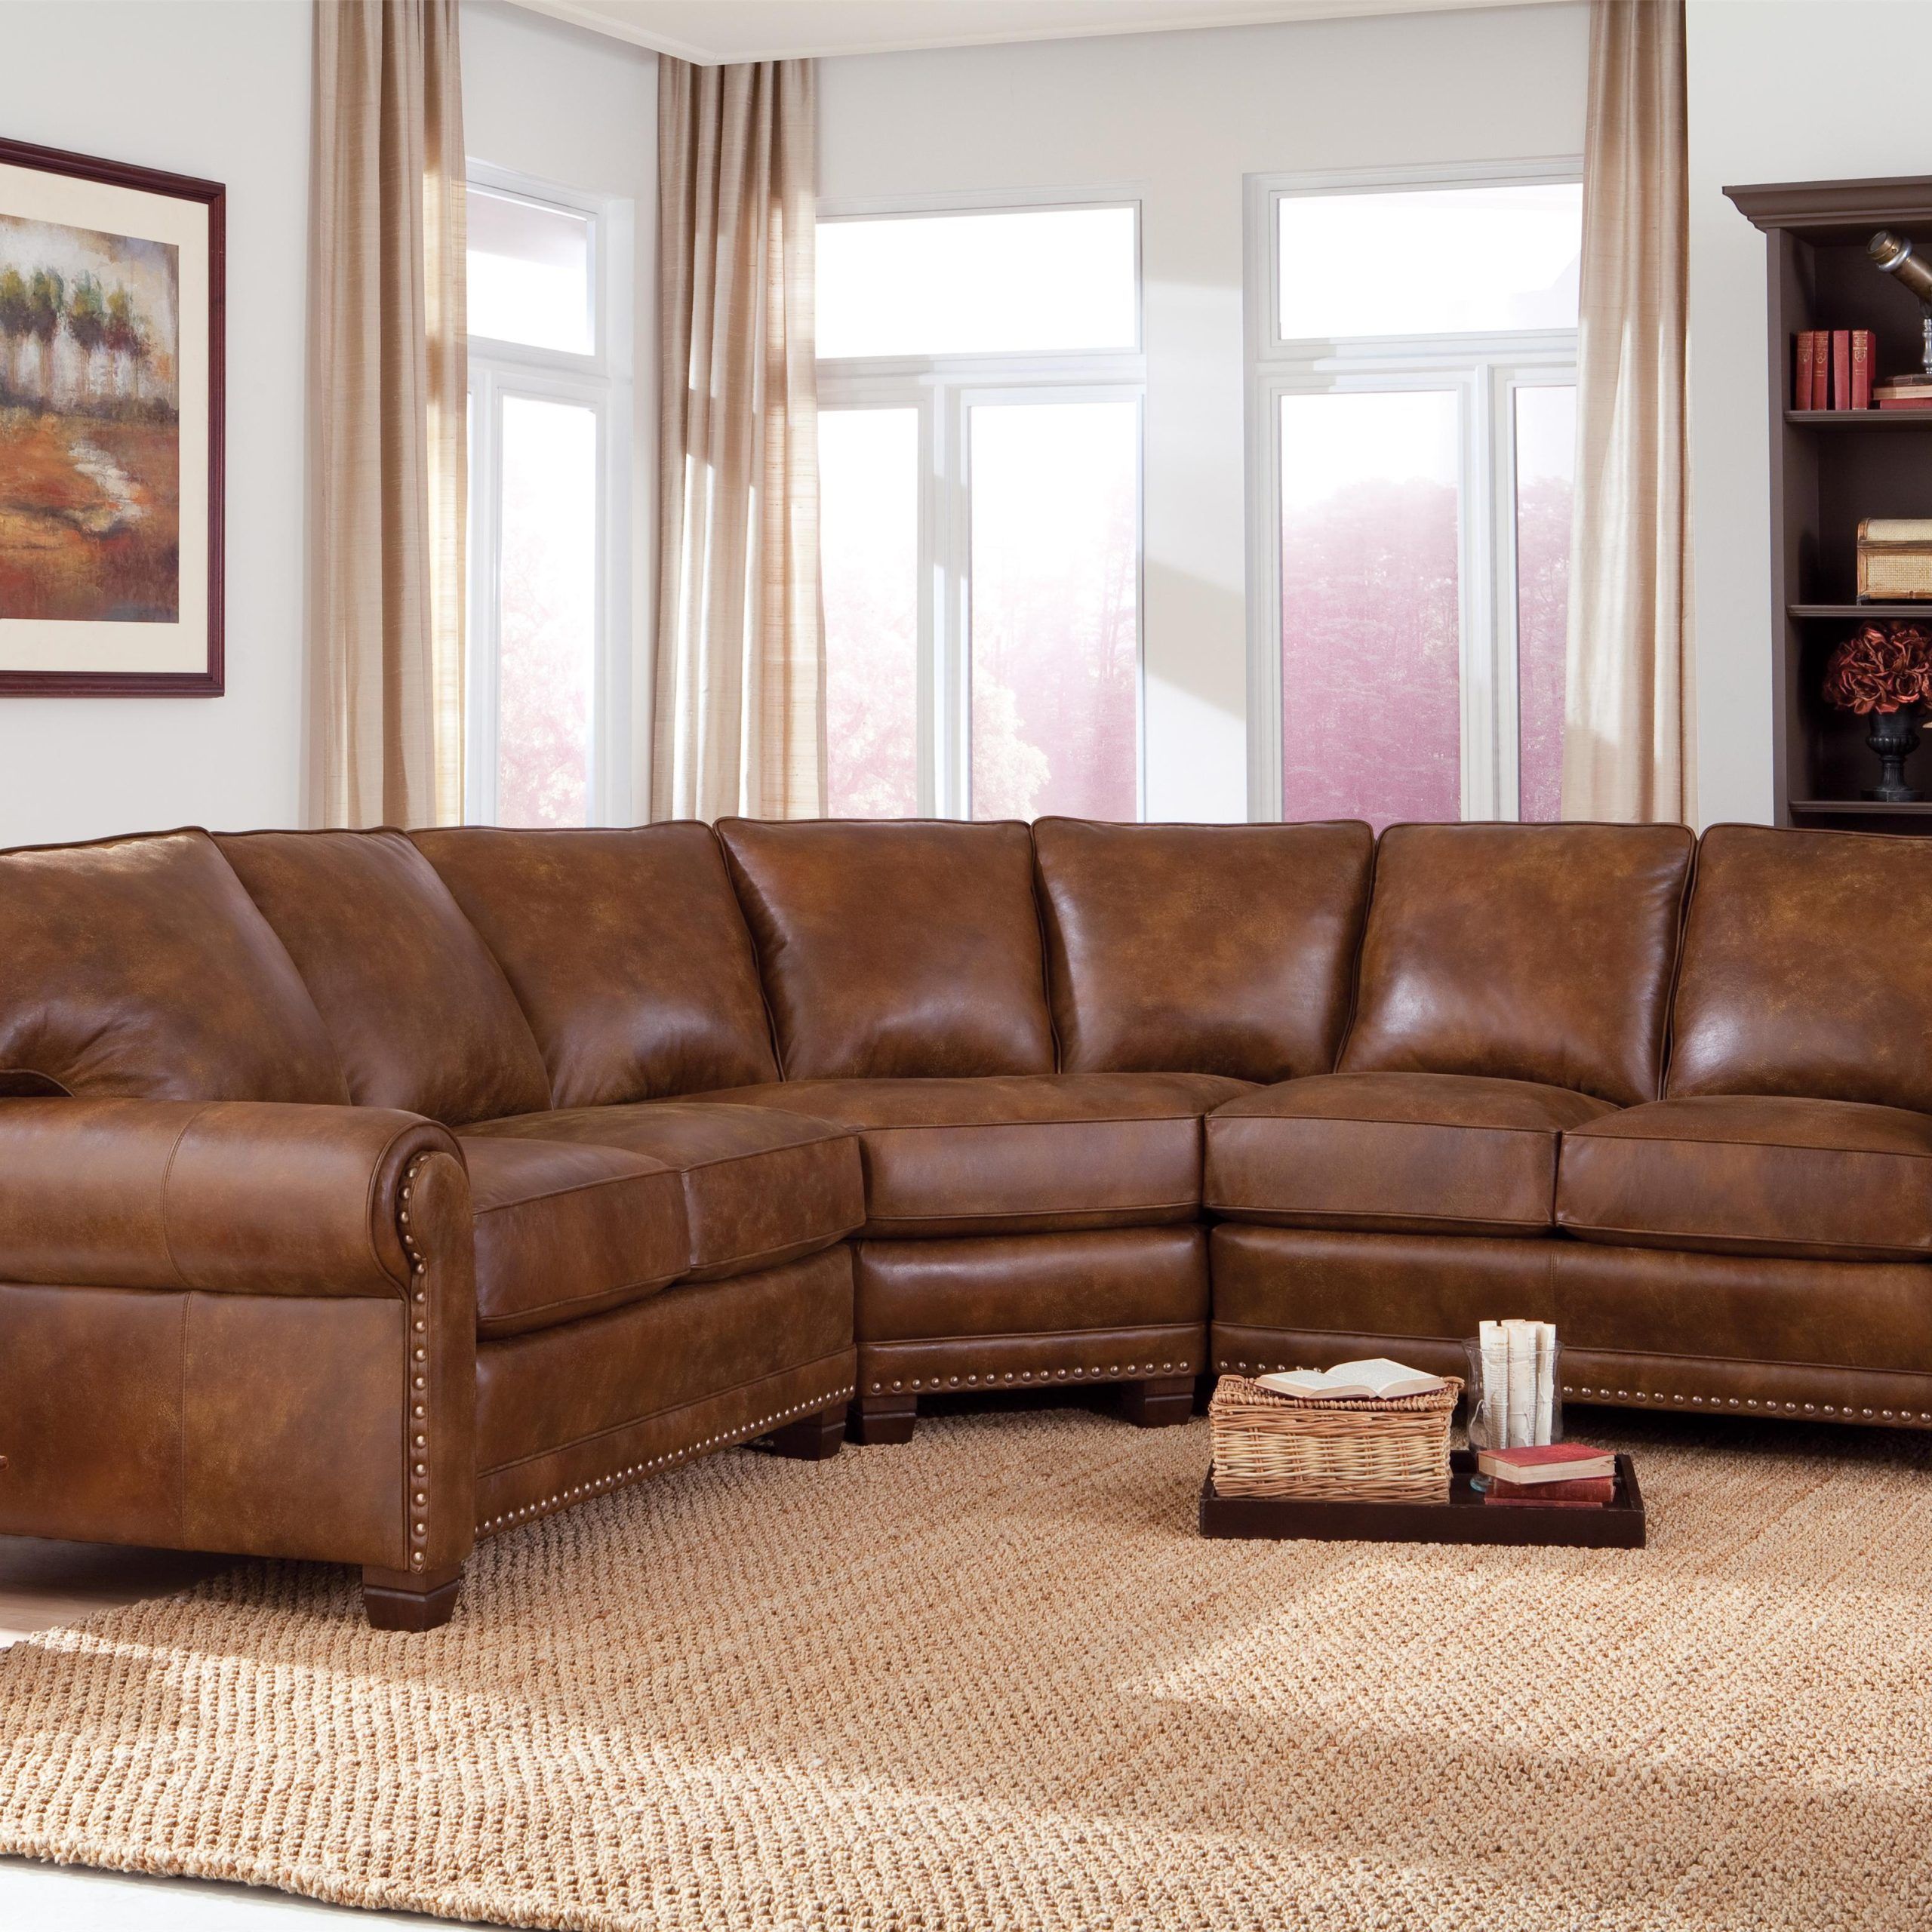 Traditional 3 Piece Sectional Sofa With Nailhead Trimsmith Brothers Inside 3 Piece Leather Sectional Sofa Sets (View 4 of 20)